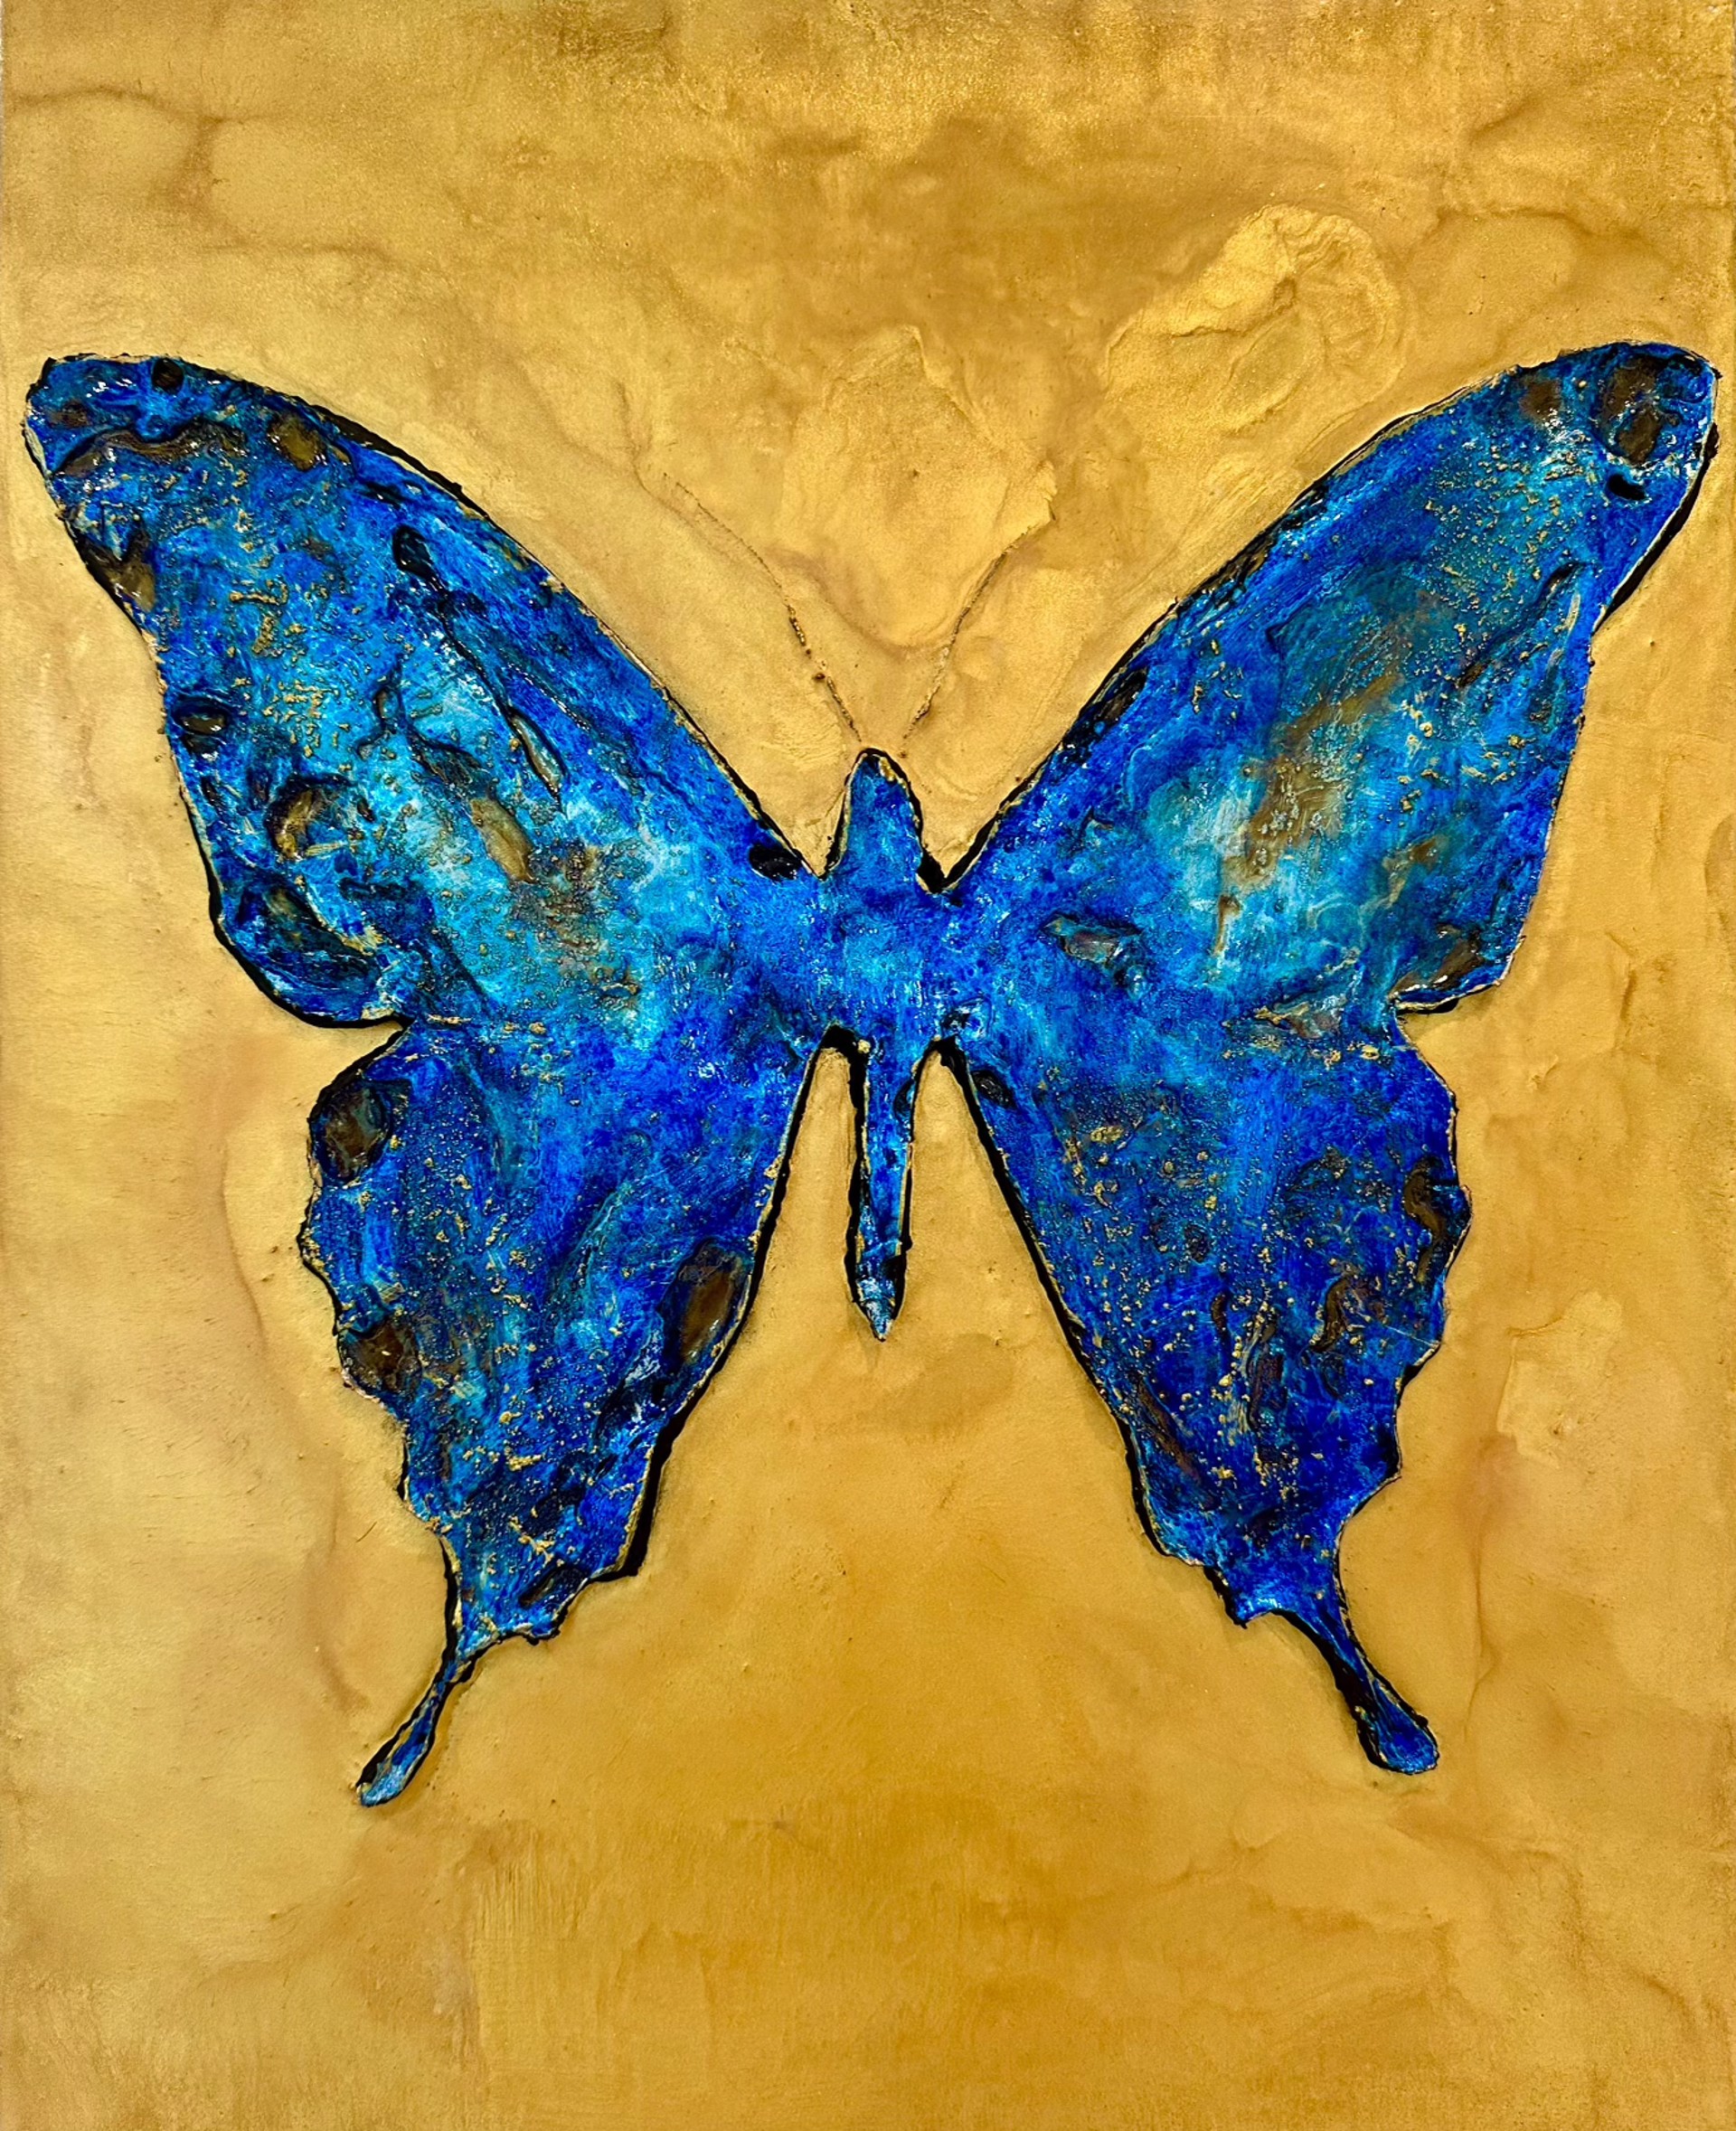 Blue Morpho III by Meredith Pardue